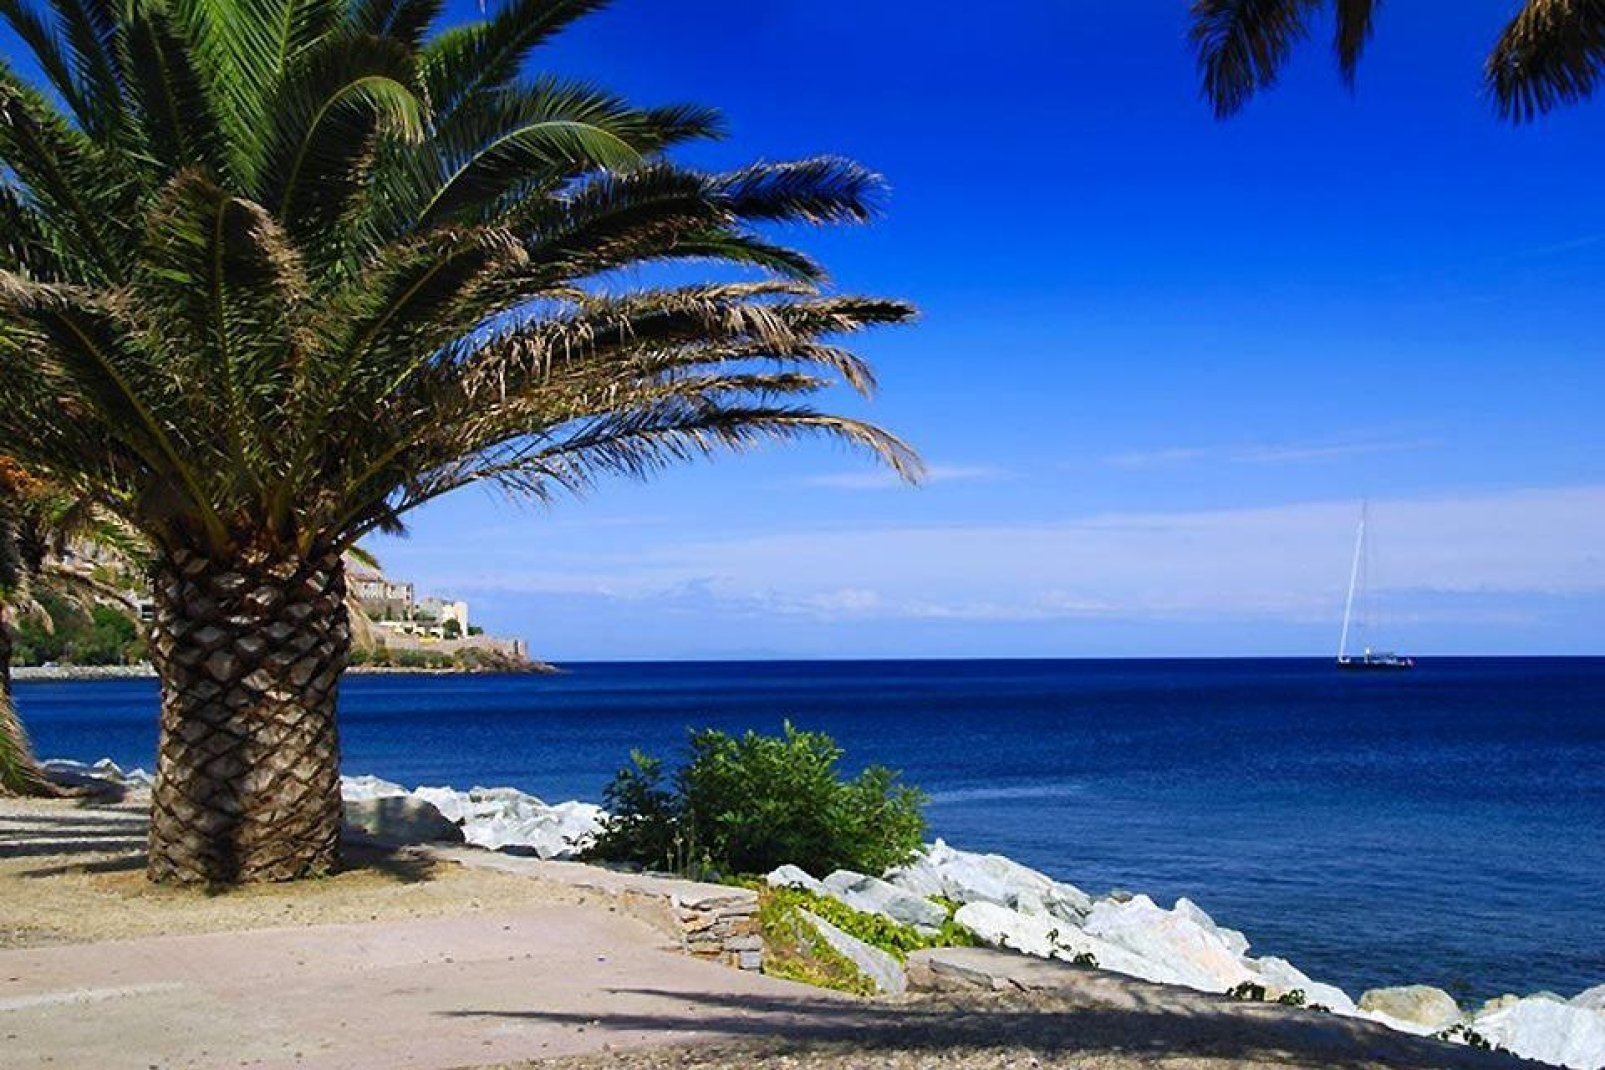 Six beaches are in close proximity to the city of Bastia, which offers magnificent vantage points of the sea.